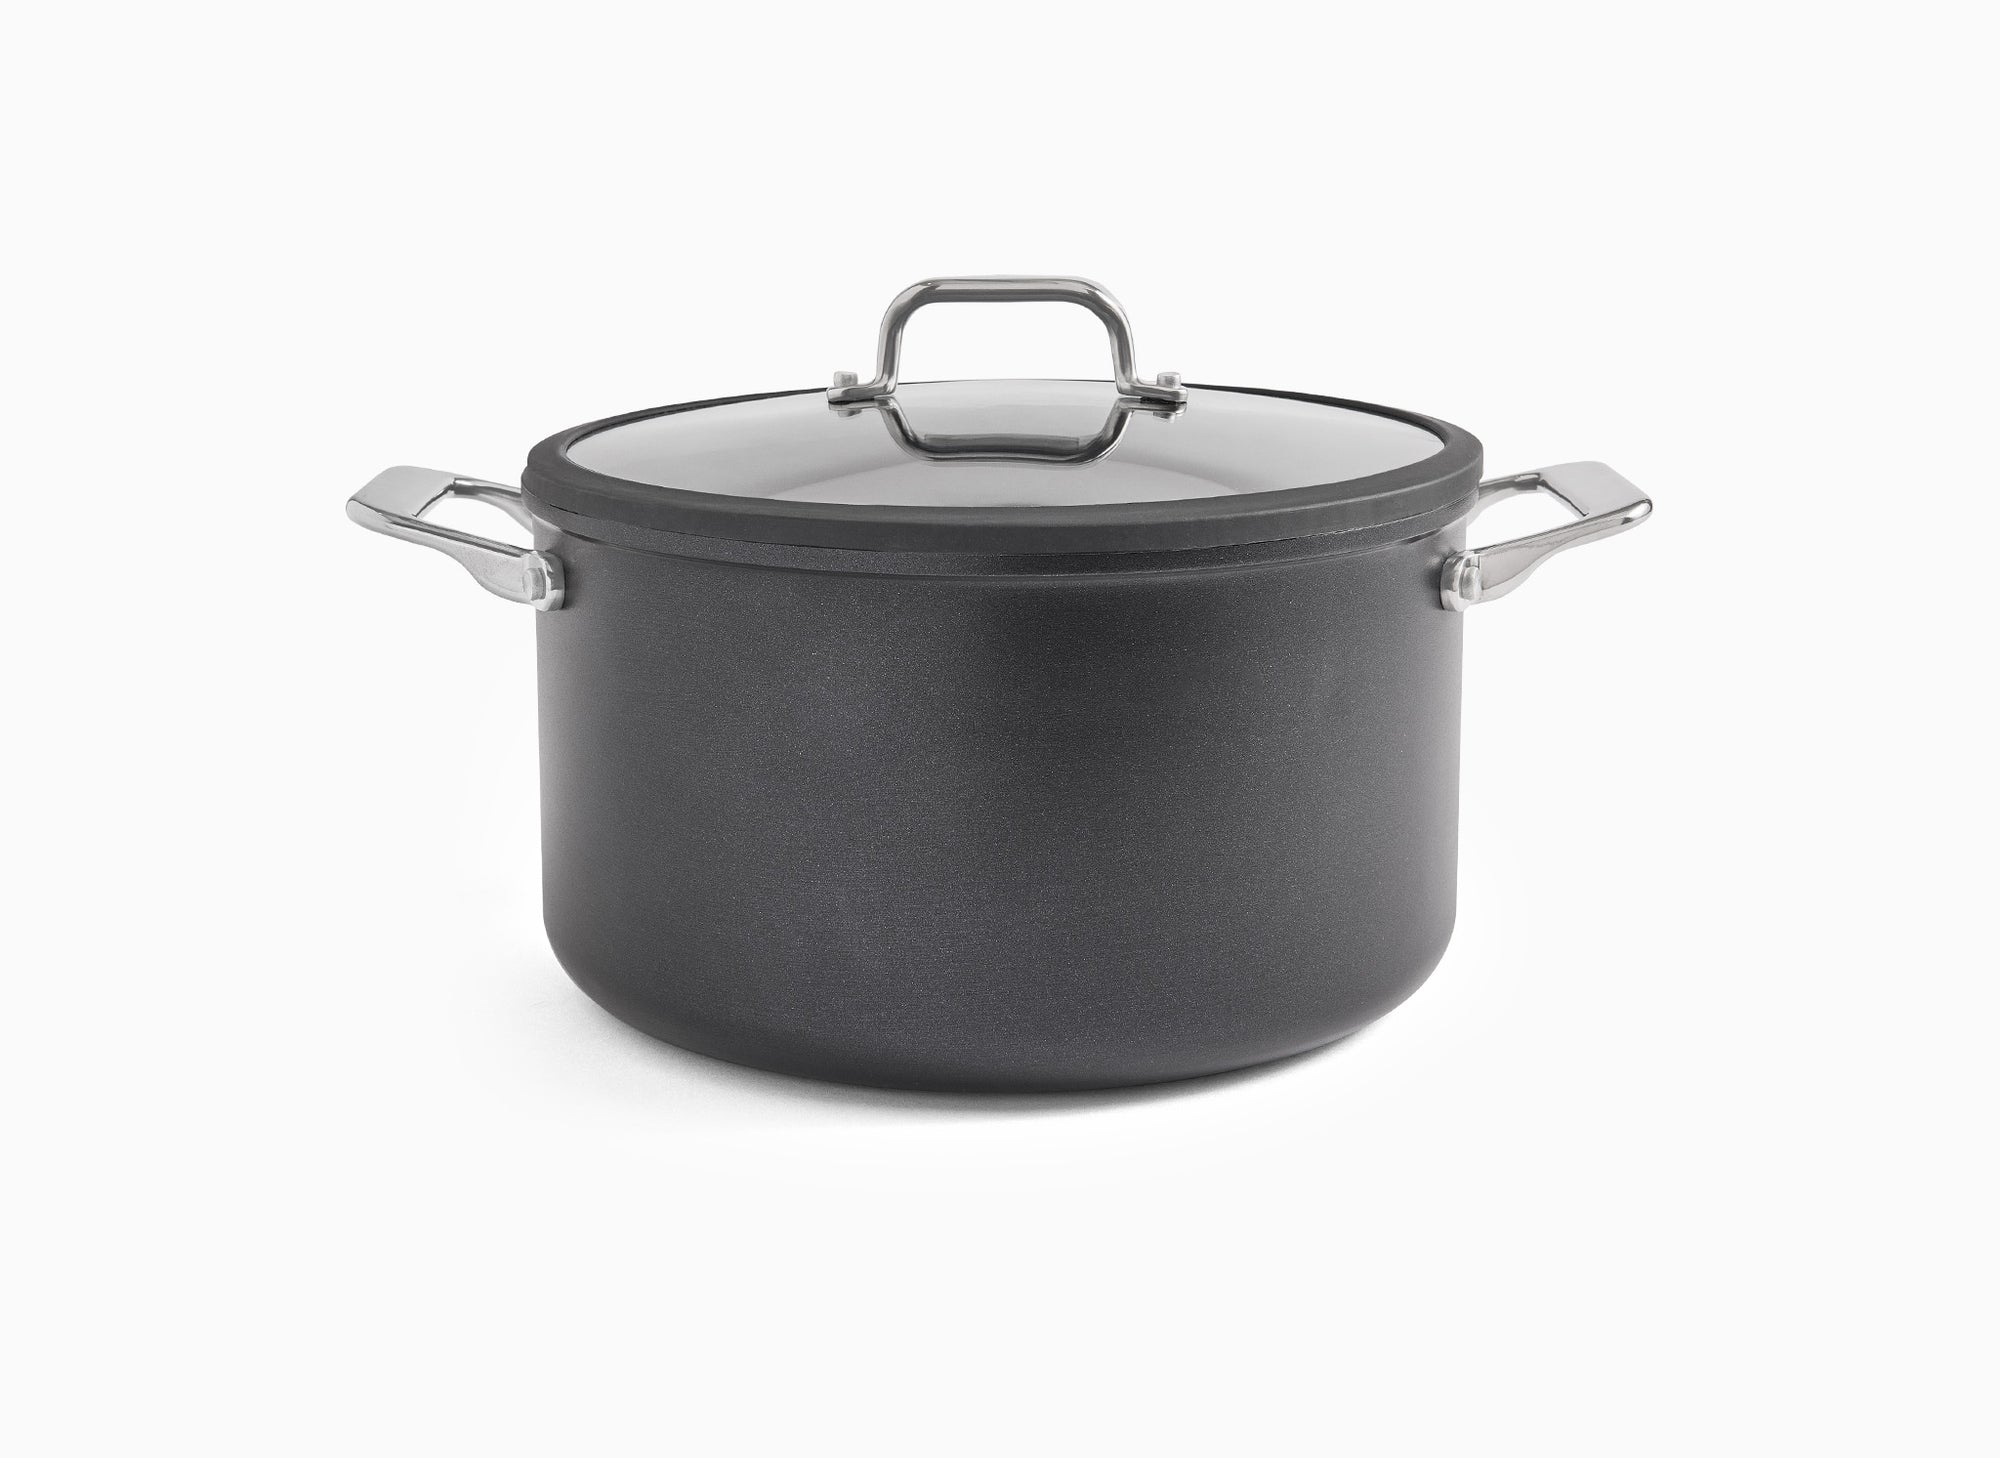 A side-facing view of the Misen 8 QT Nonstick Stockpot, with lid on, on a white background.